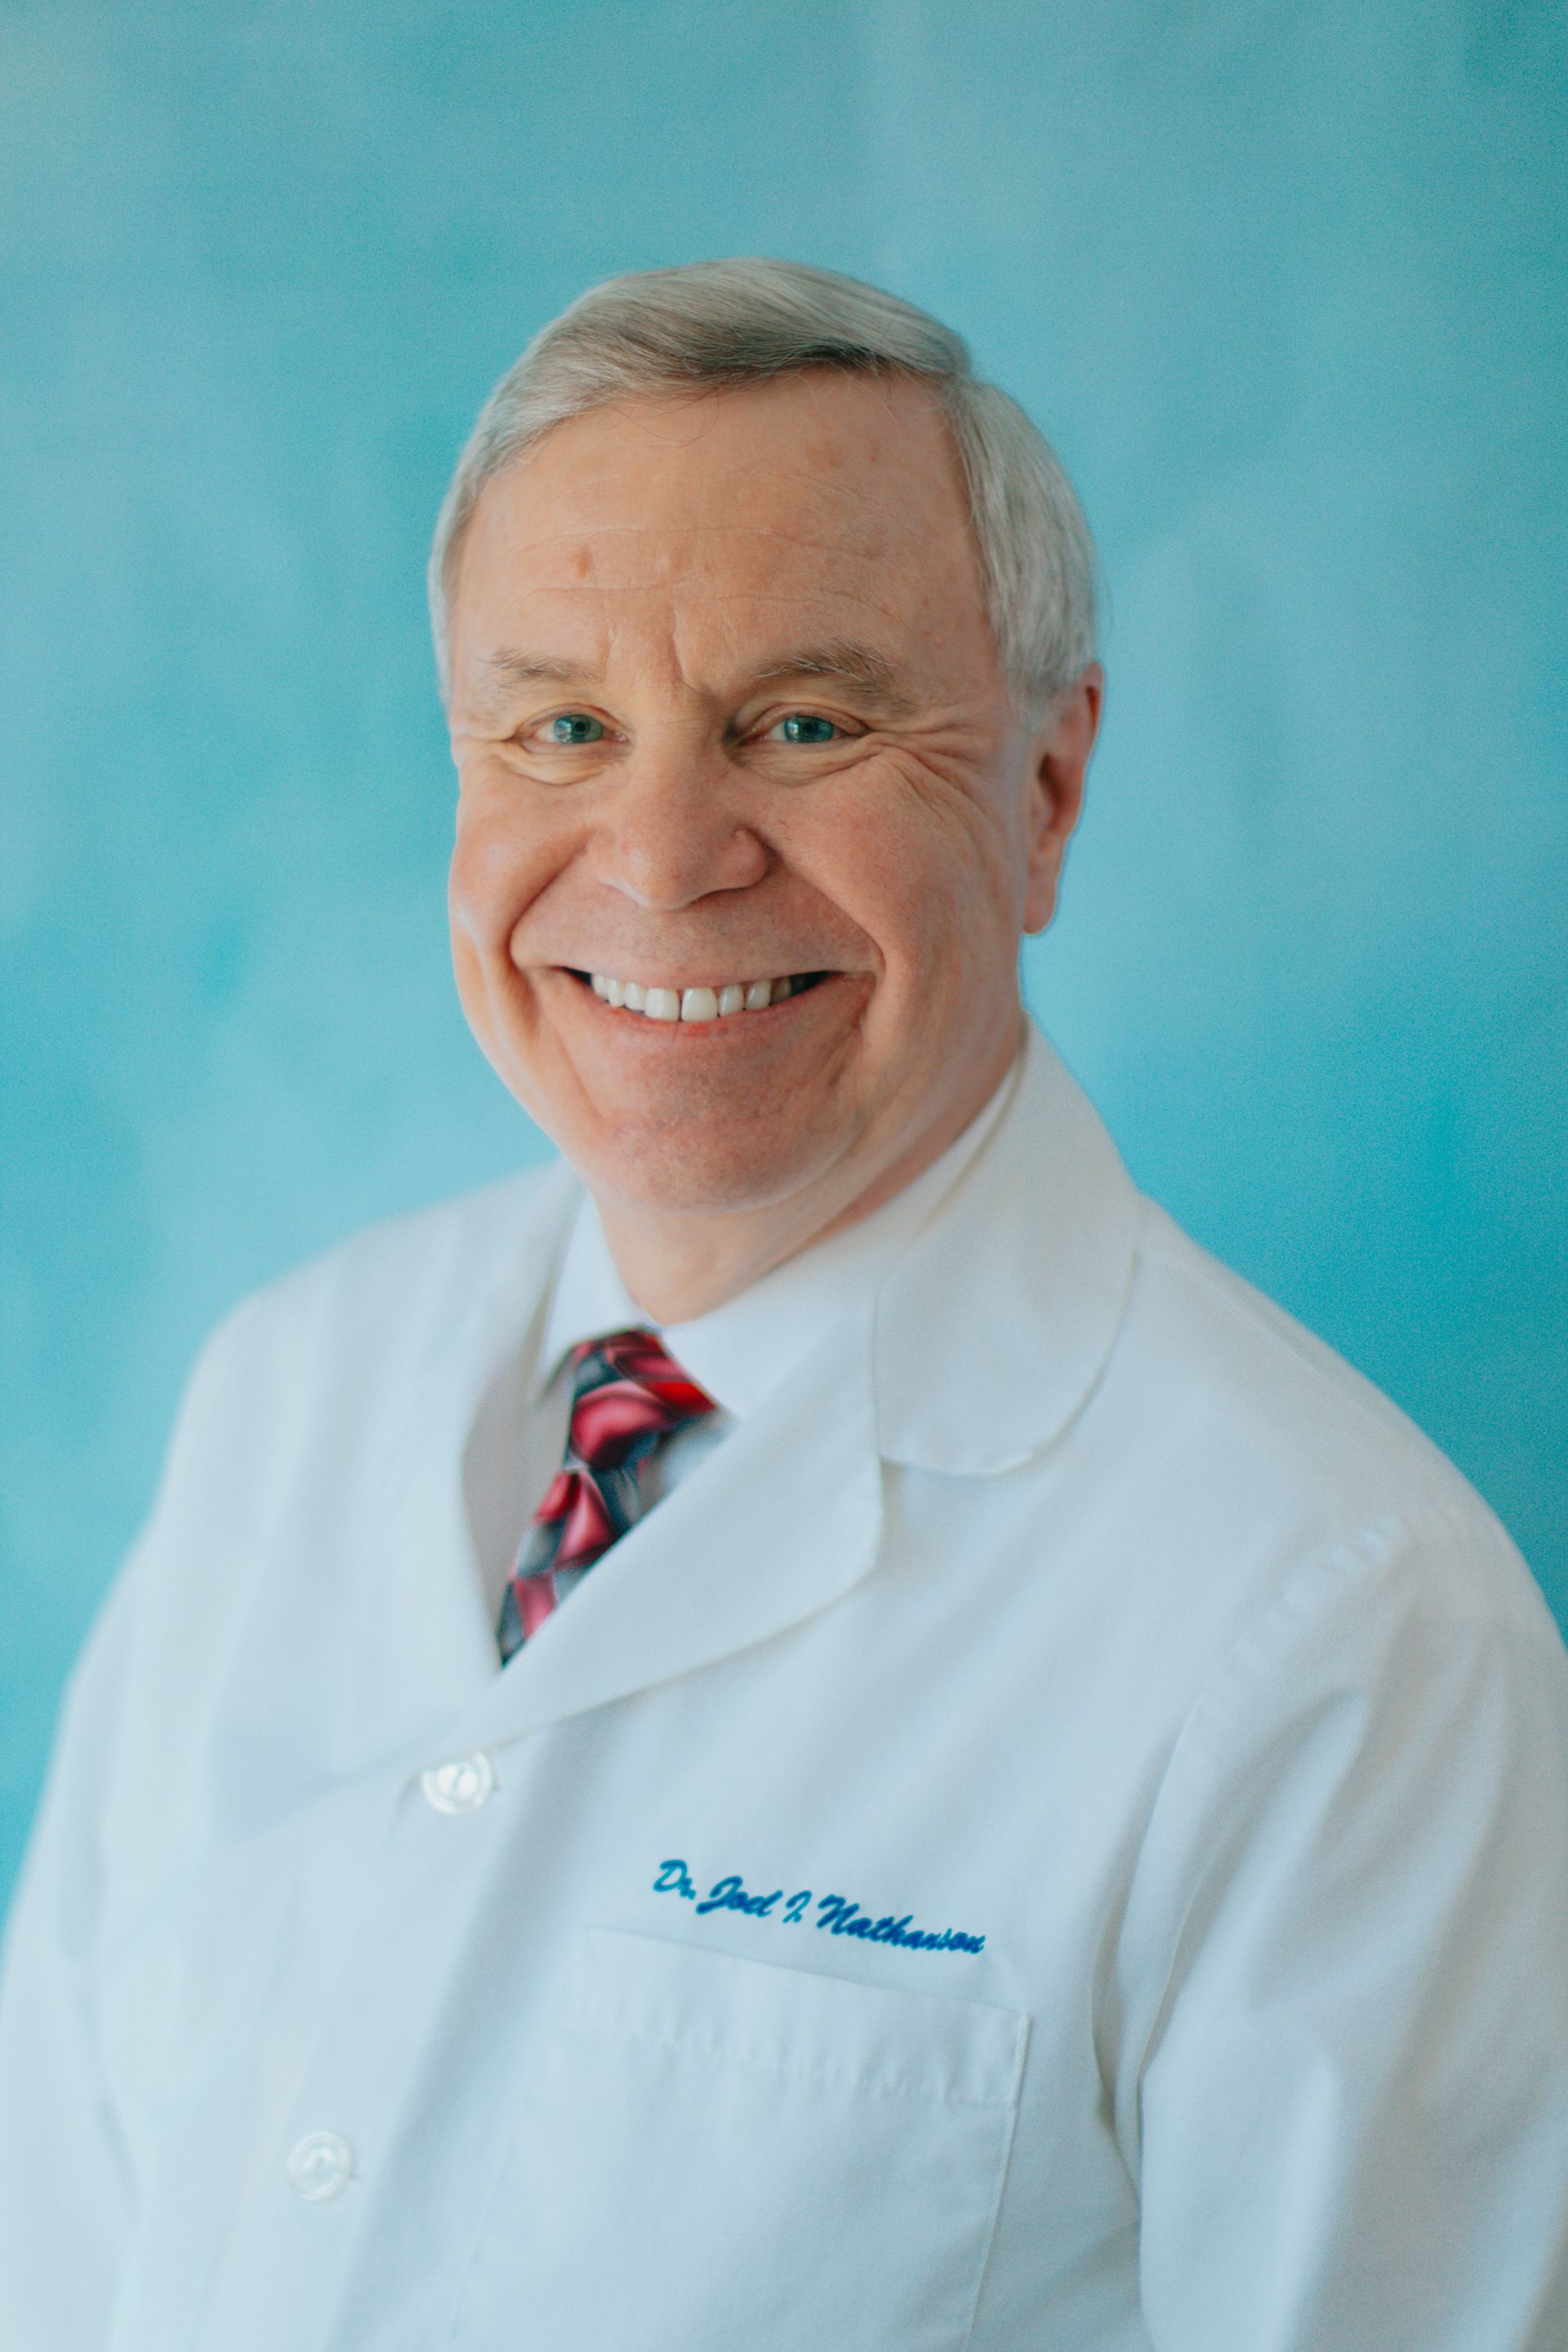 Dr Nathanson Headshot | Best Dentist for fillings, dentures and TMD | Hunt Valley MD